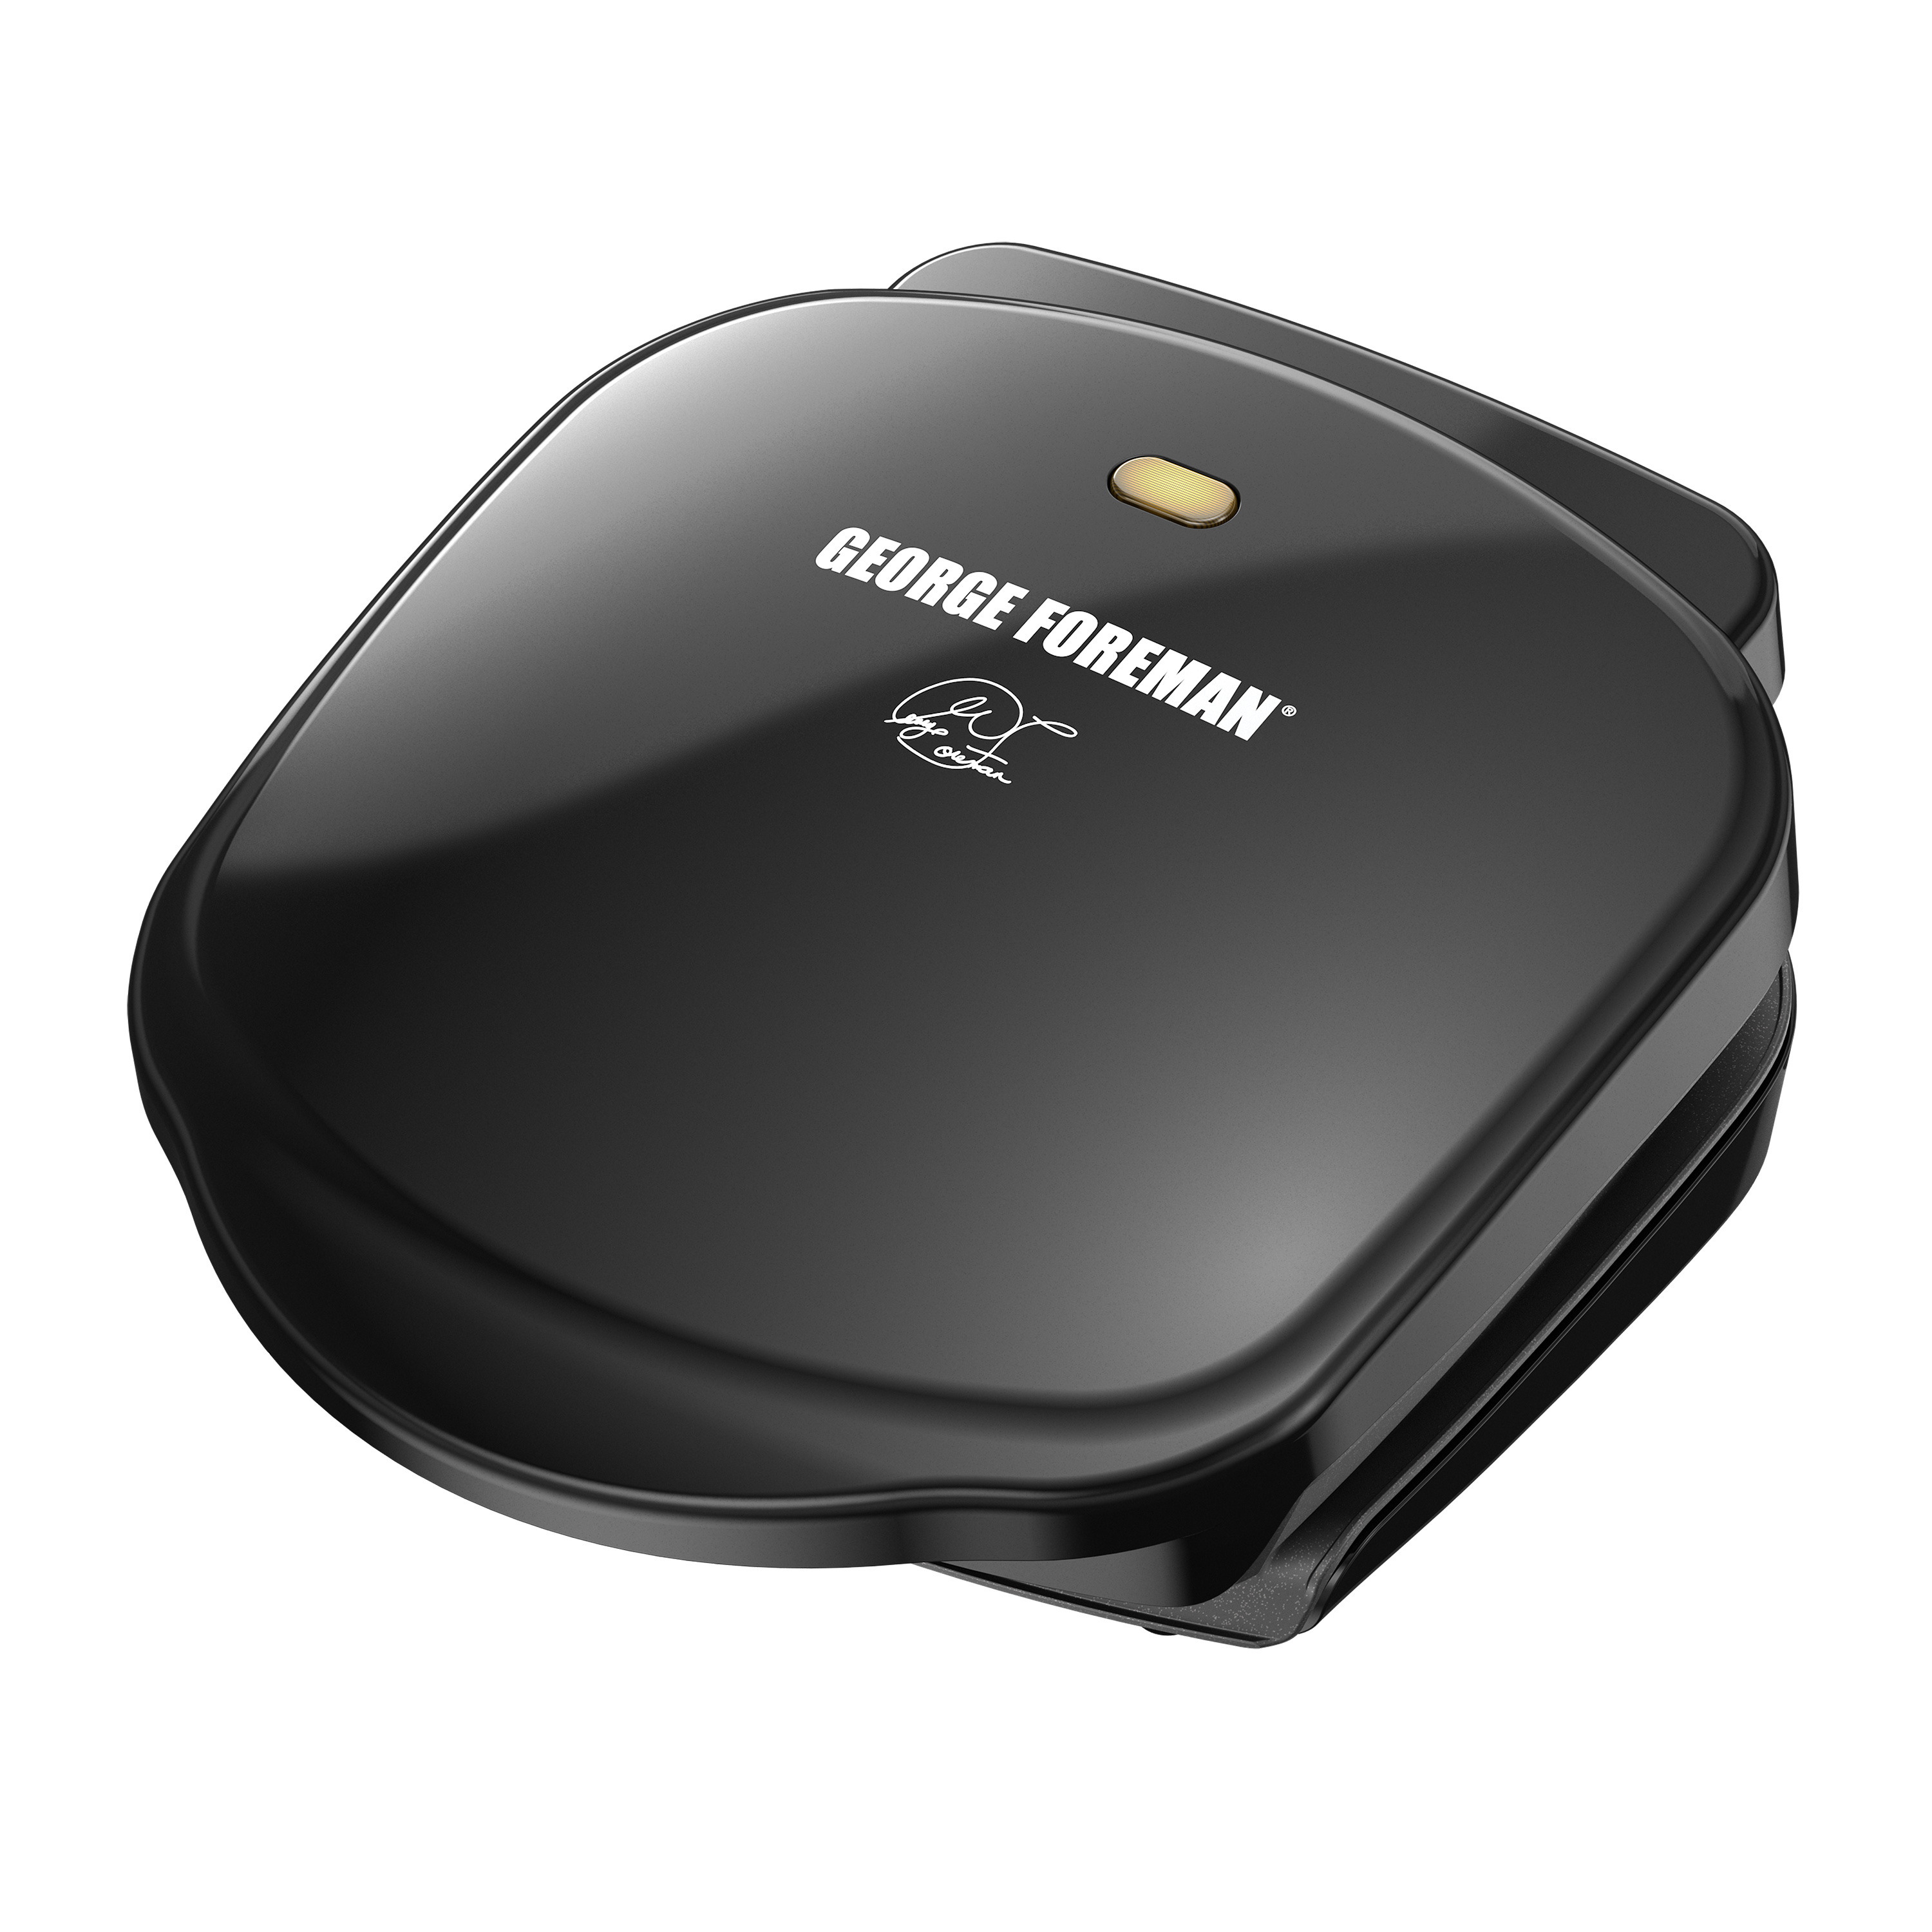 George Foreman 2-Serving Classic Plate Electric Indoor Grill and Panini Press, Black, GR10B - image 1 of 13